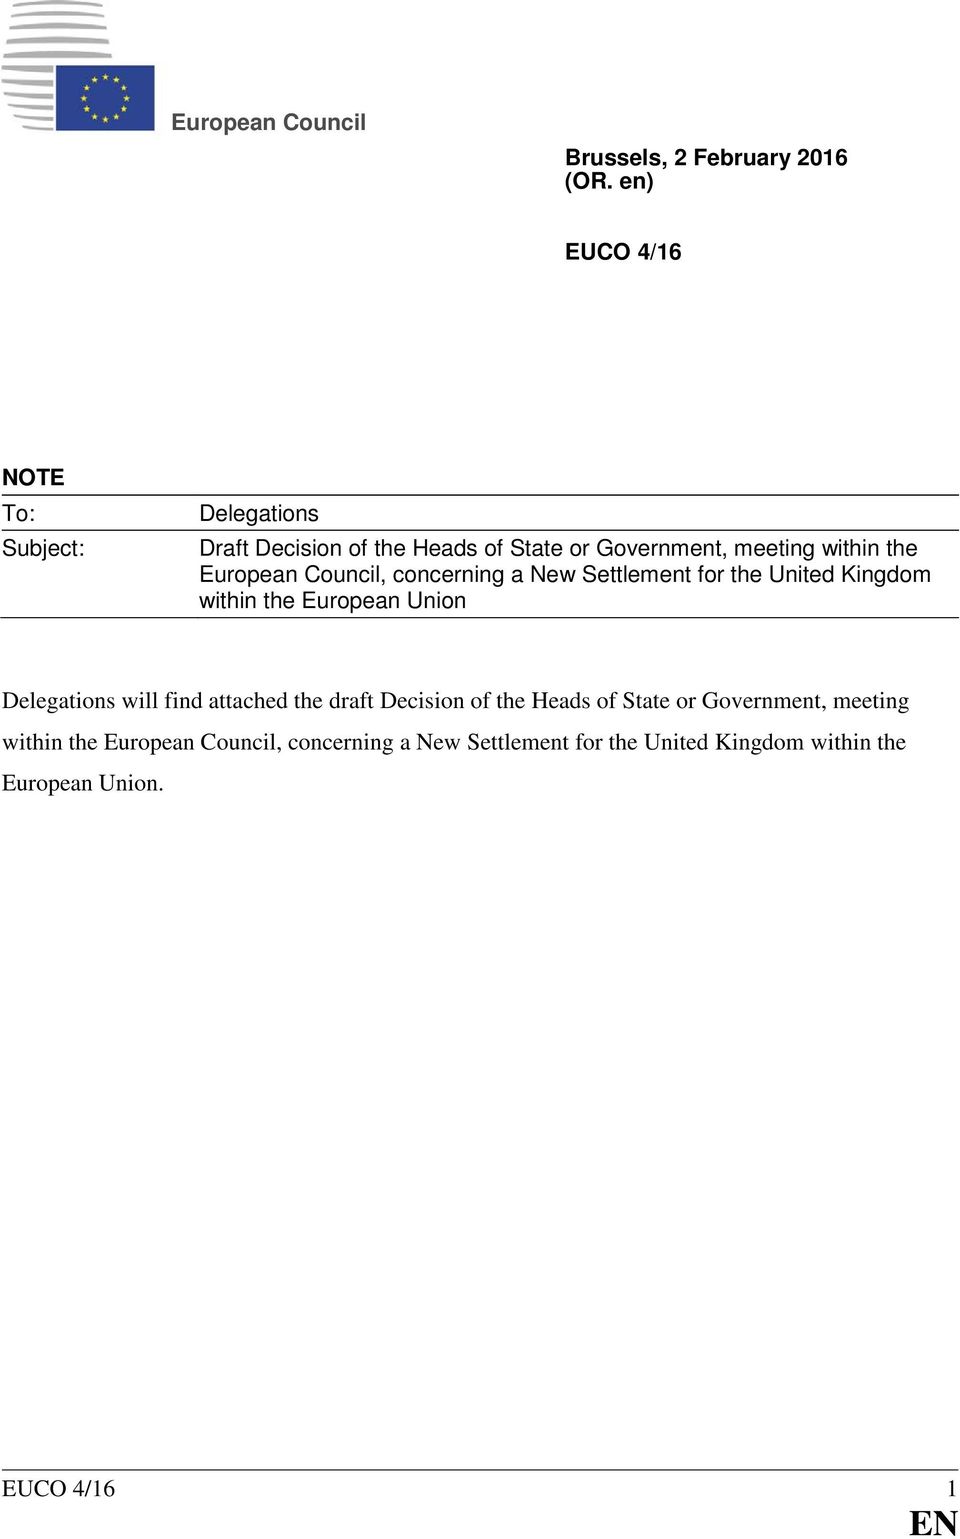 European Council, concerning a New Settlement for the United Kingdom within the European Union Delegations will find